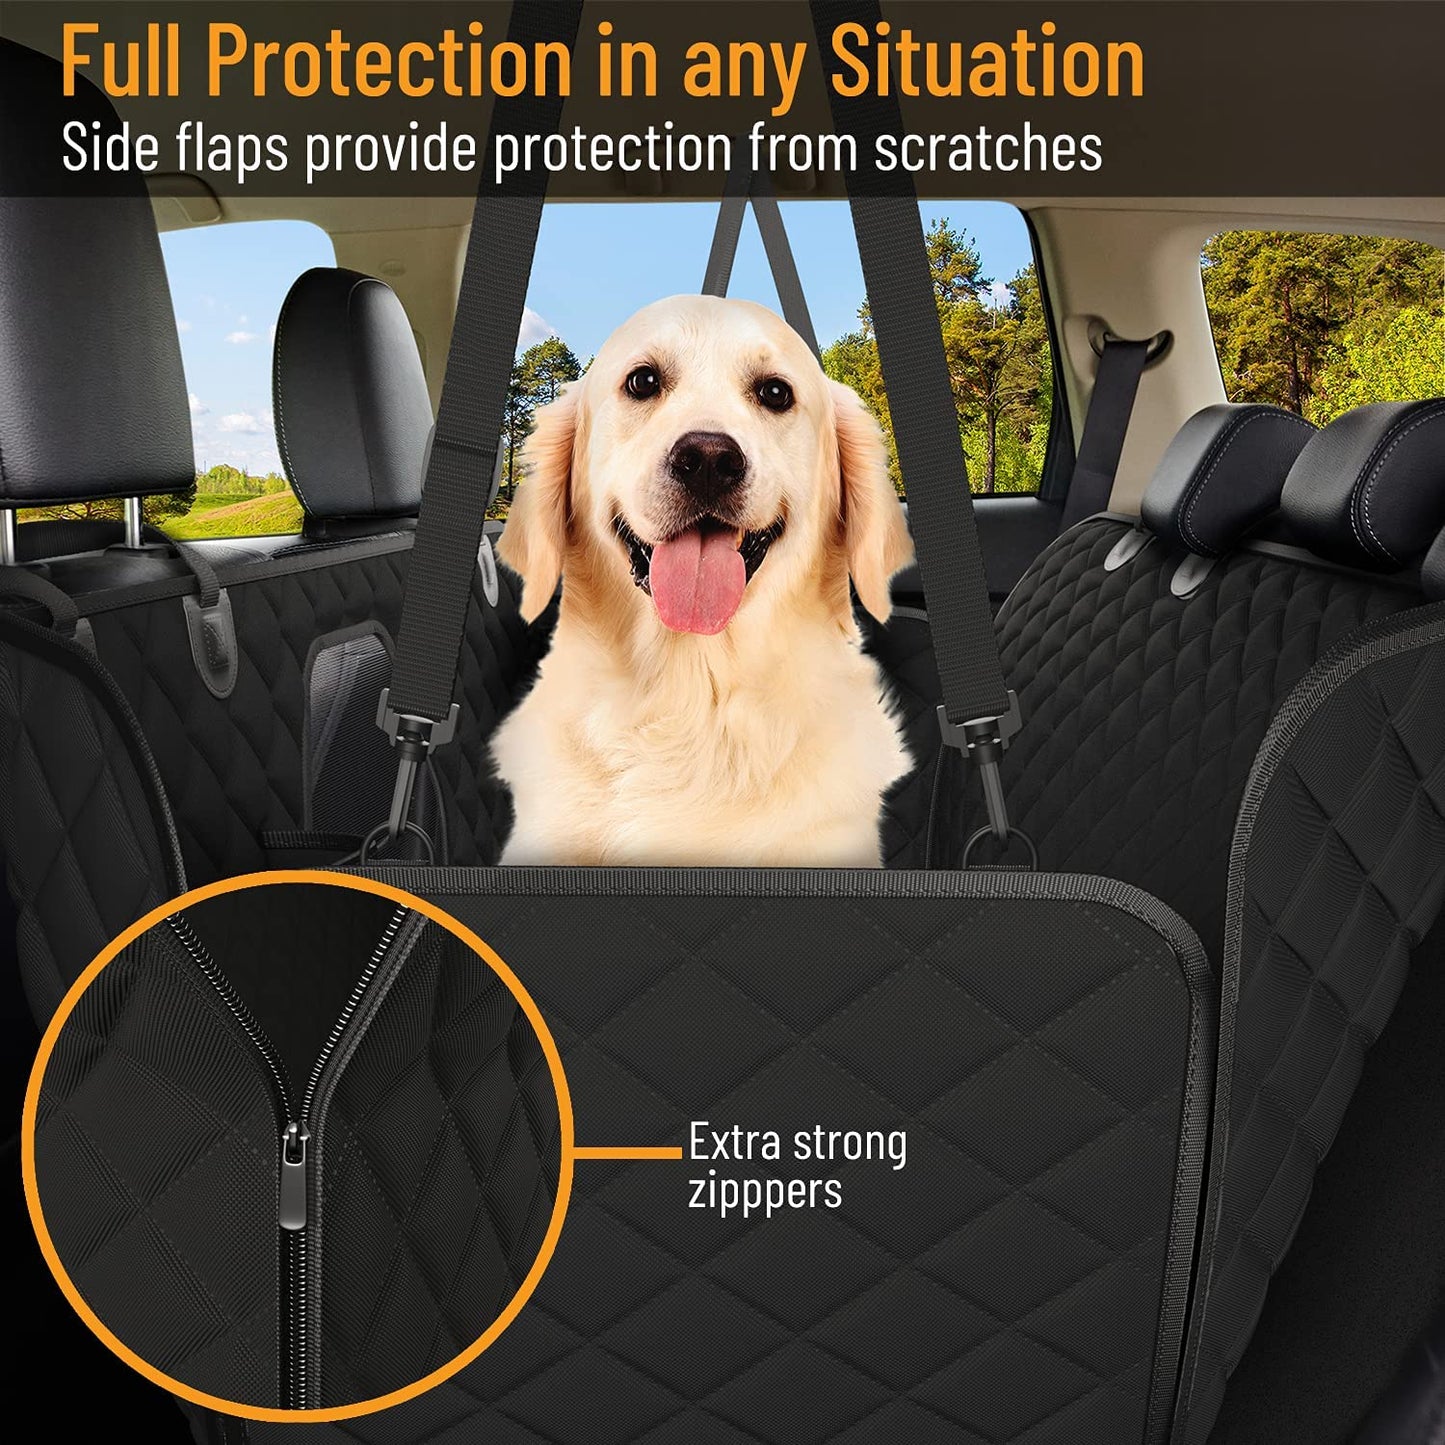 Dog Car Seat Cover Car Seat Protector- Dog Seat Cover for Back Seat of Suvs, Trucks, Cars - Waterproof & Convertible Vehicle Dog Hammock for Car Backseat - Mesh Window - Black